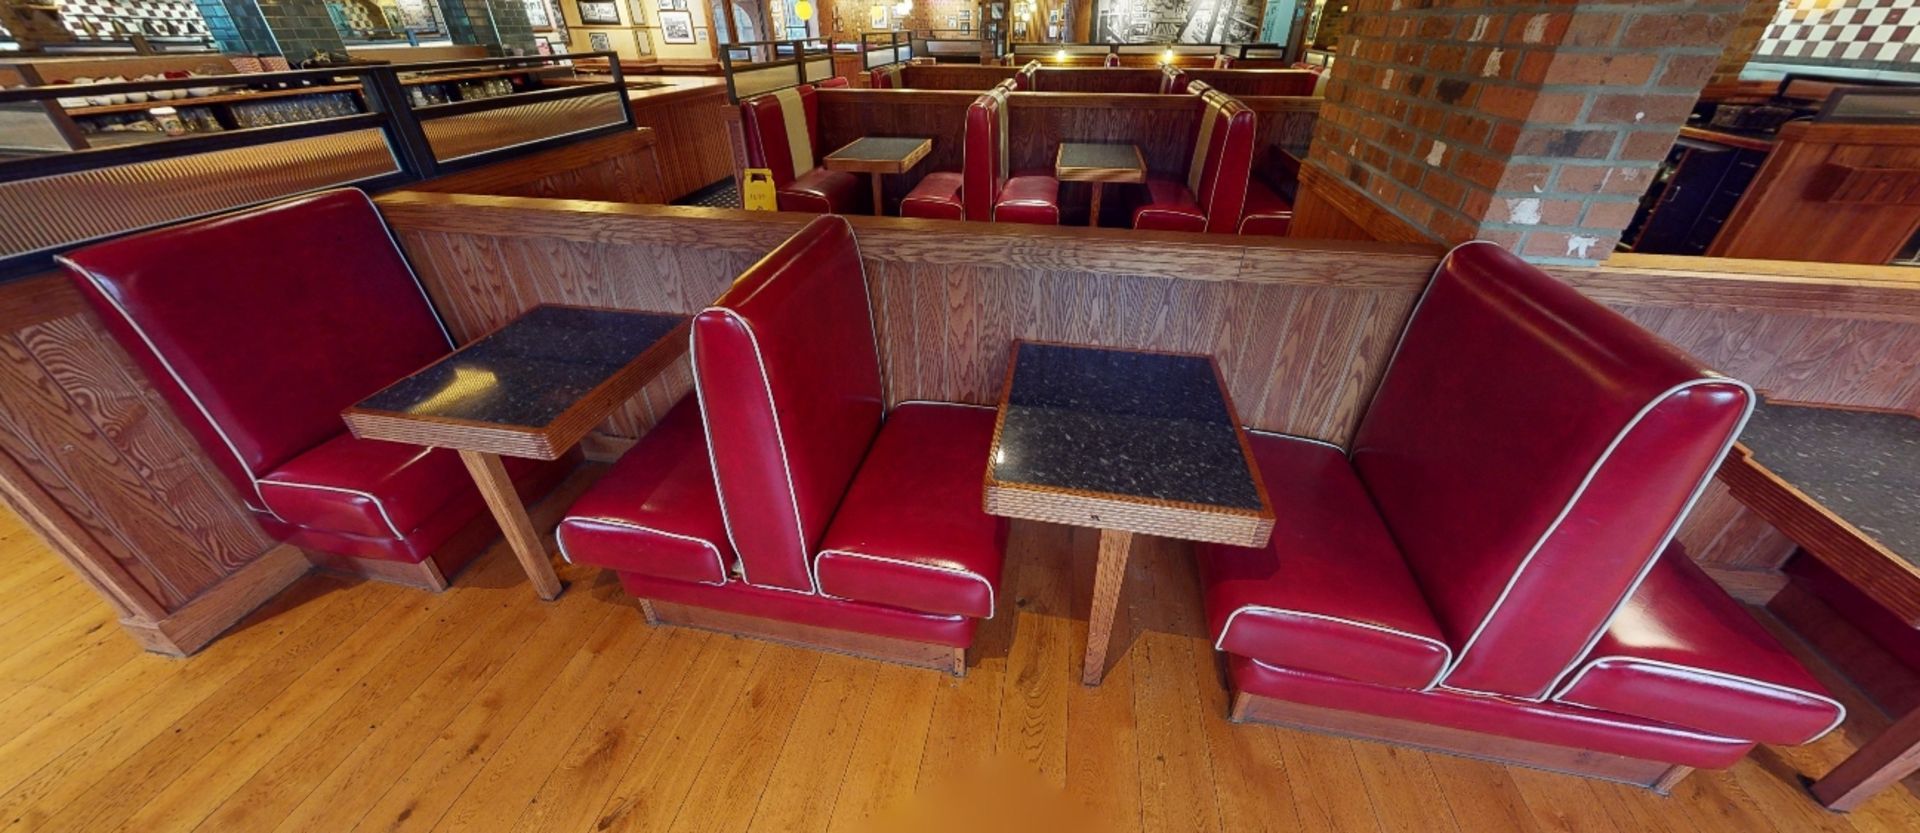 Selection of Single Seating Benches and Dining Tables to Seat Upto 10 Persons - Retro - 1950's - Image 4 of 6